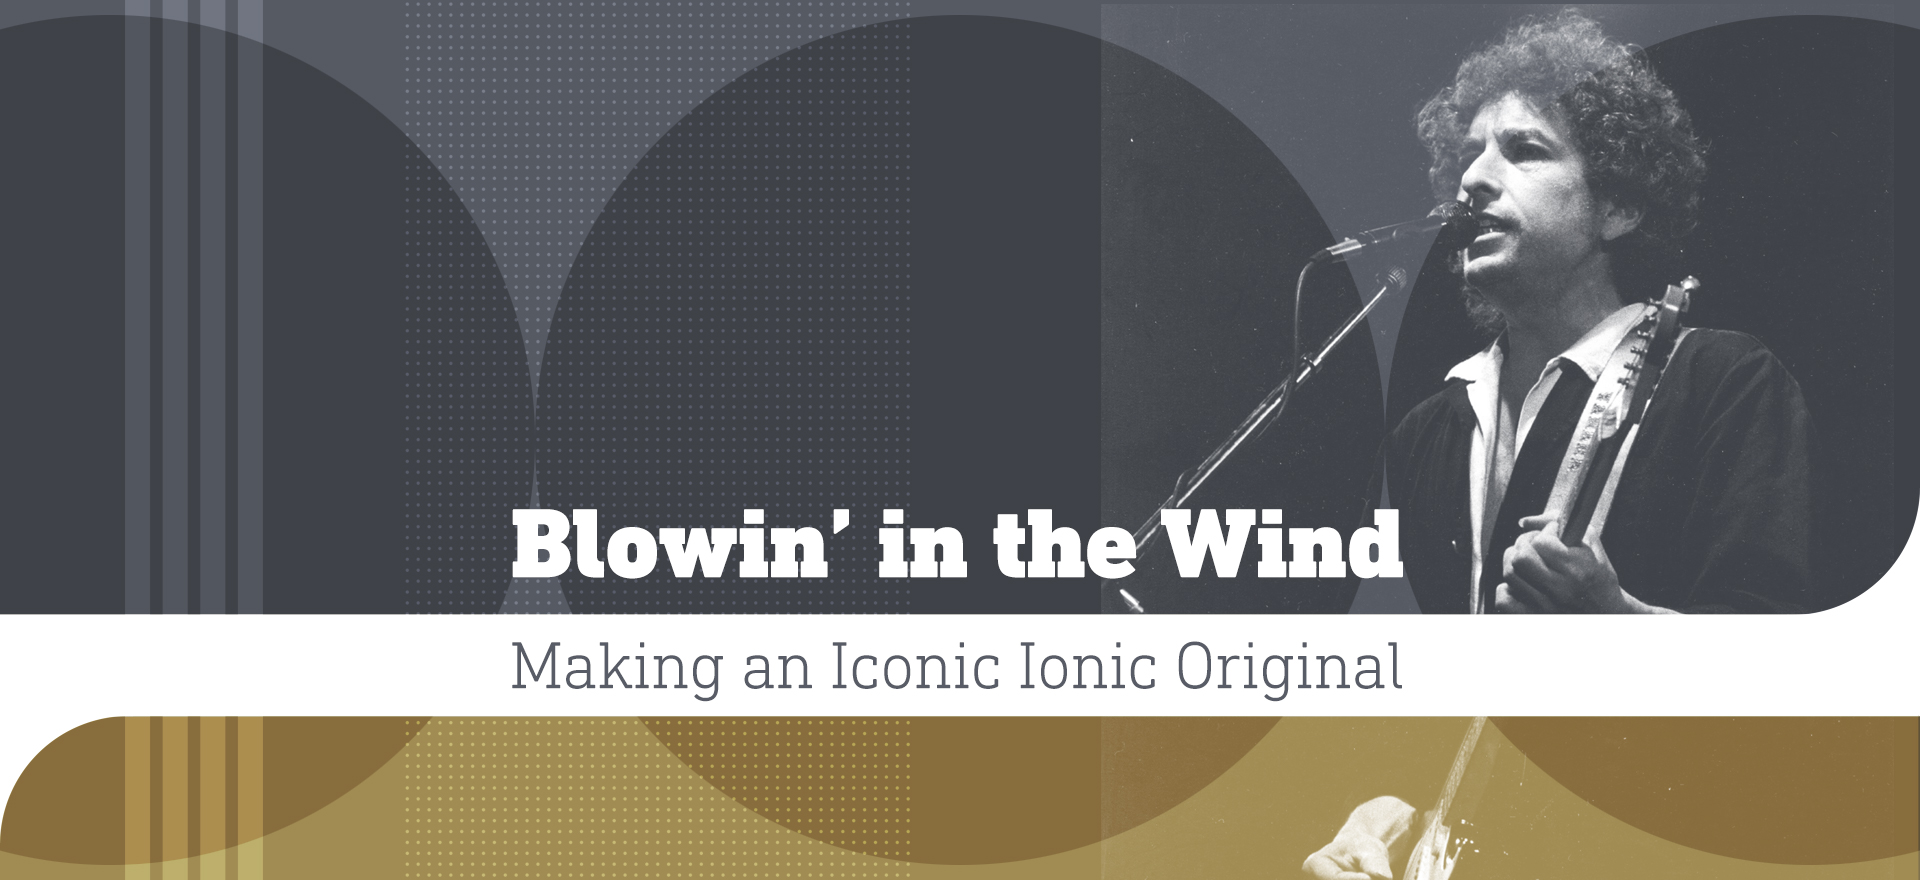 Blowin' in the Wind, Making an iconic ionic original